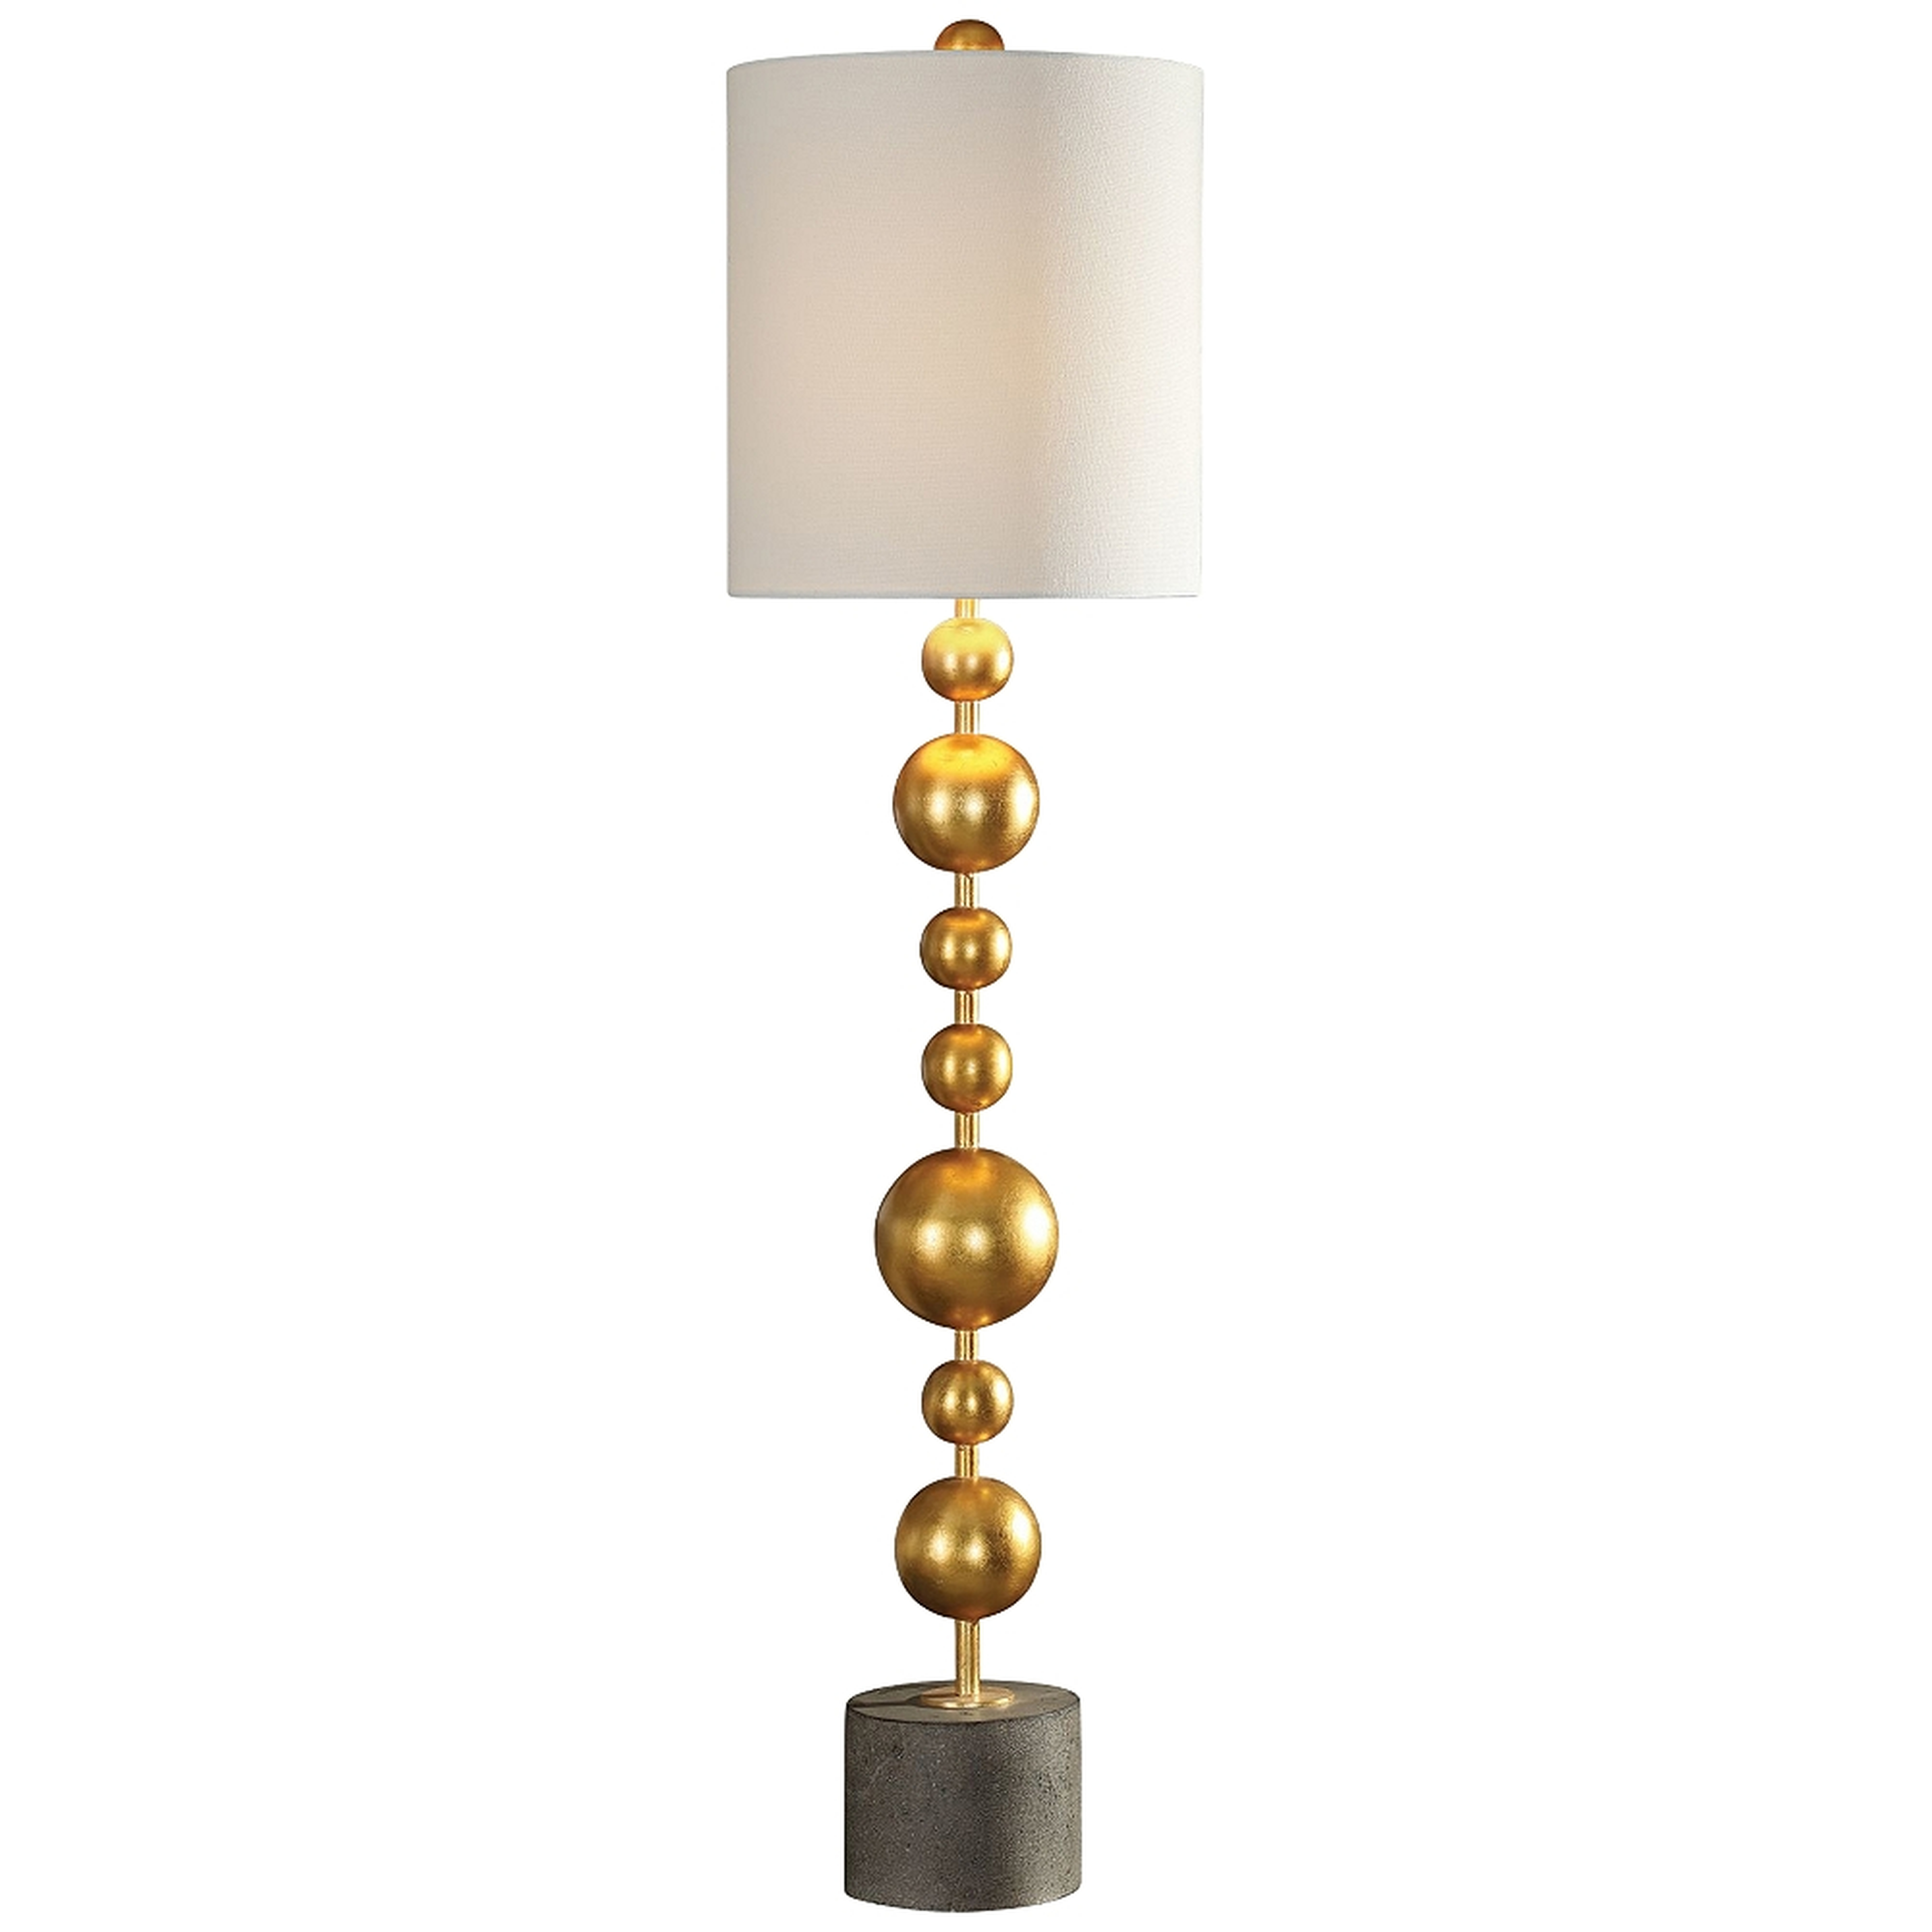 Selim Metallic Gold Leaf Stacked Spheres Buffet Table Lamp - Style # 41C53 - Lamps Plus